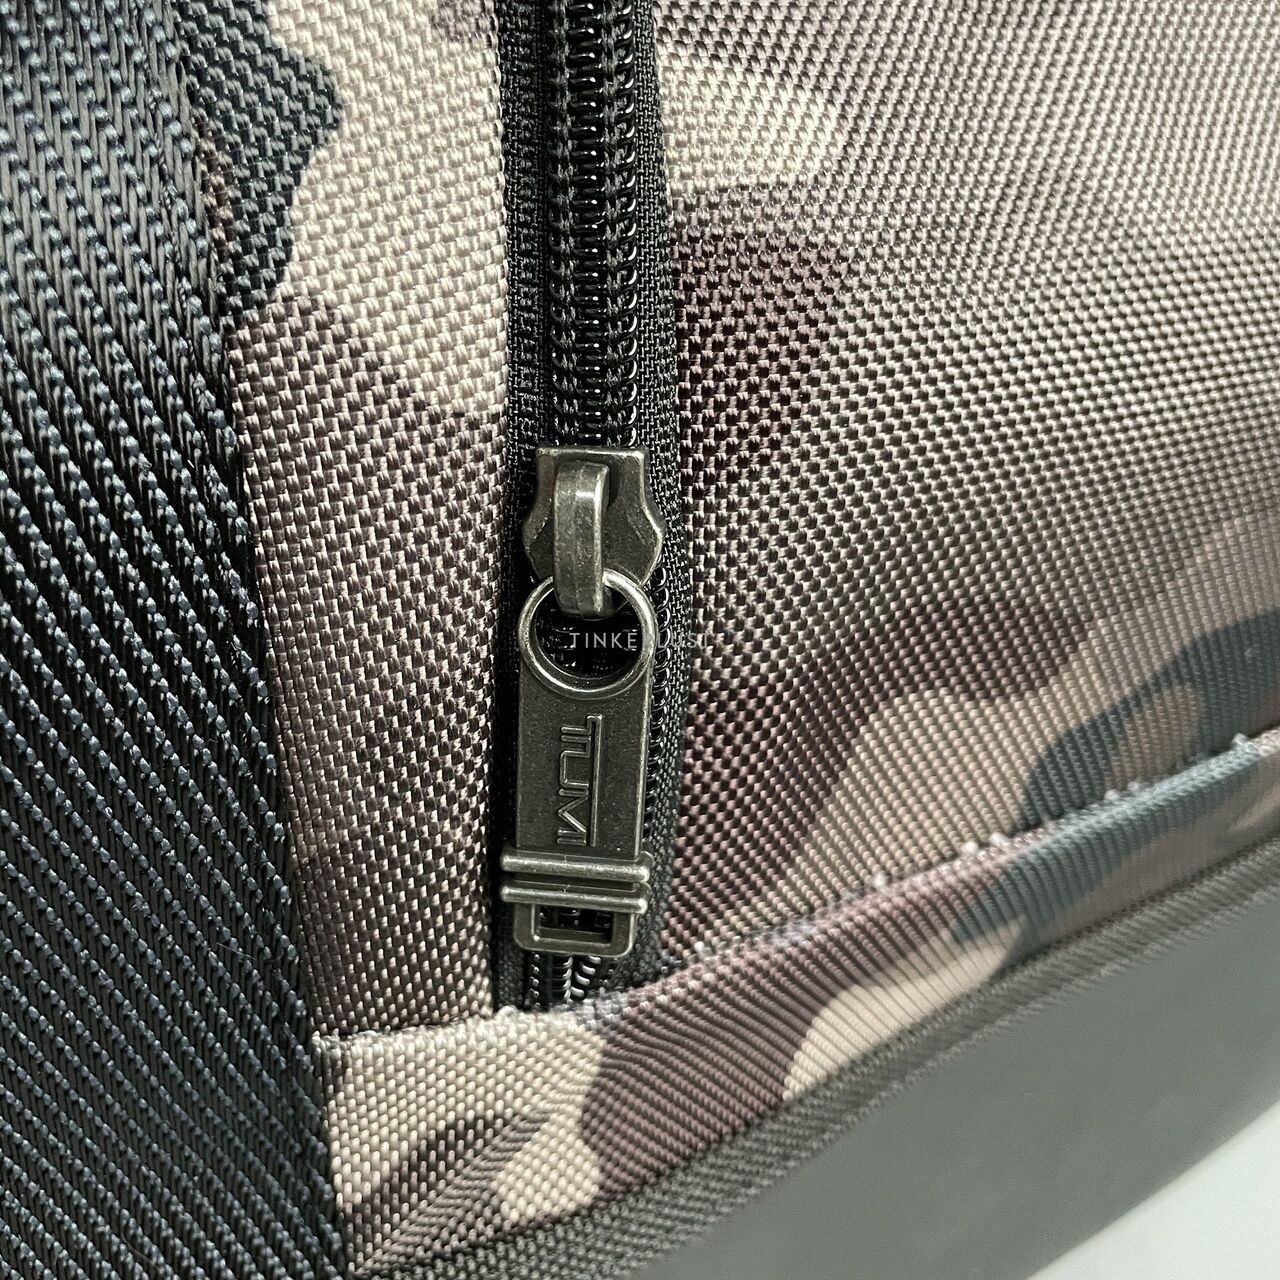 Tumi Phinney Camo Army Large Backpack	